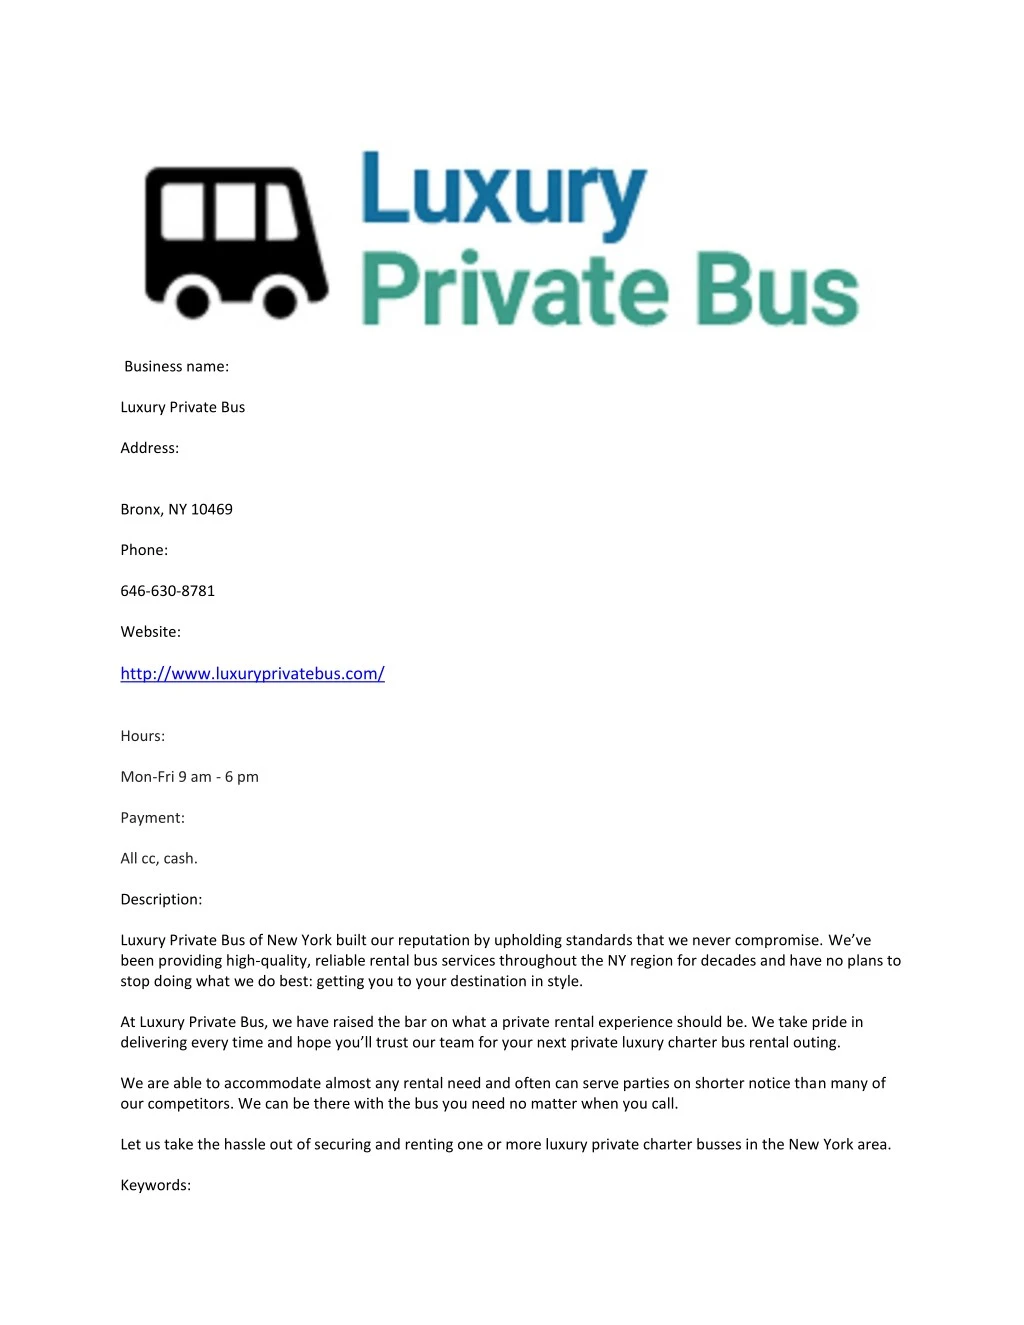 business name luxury private bus address bronx